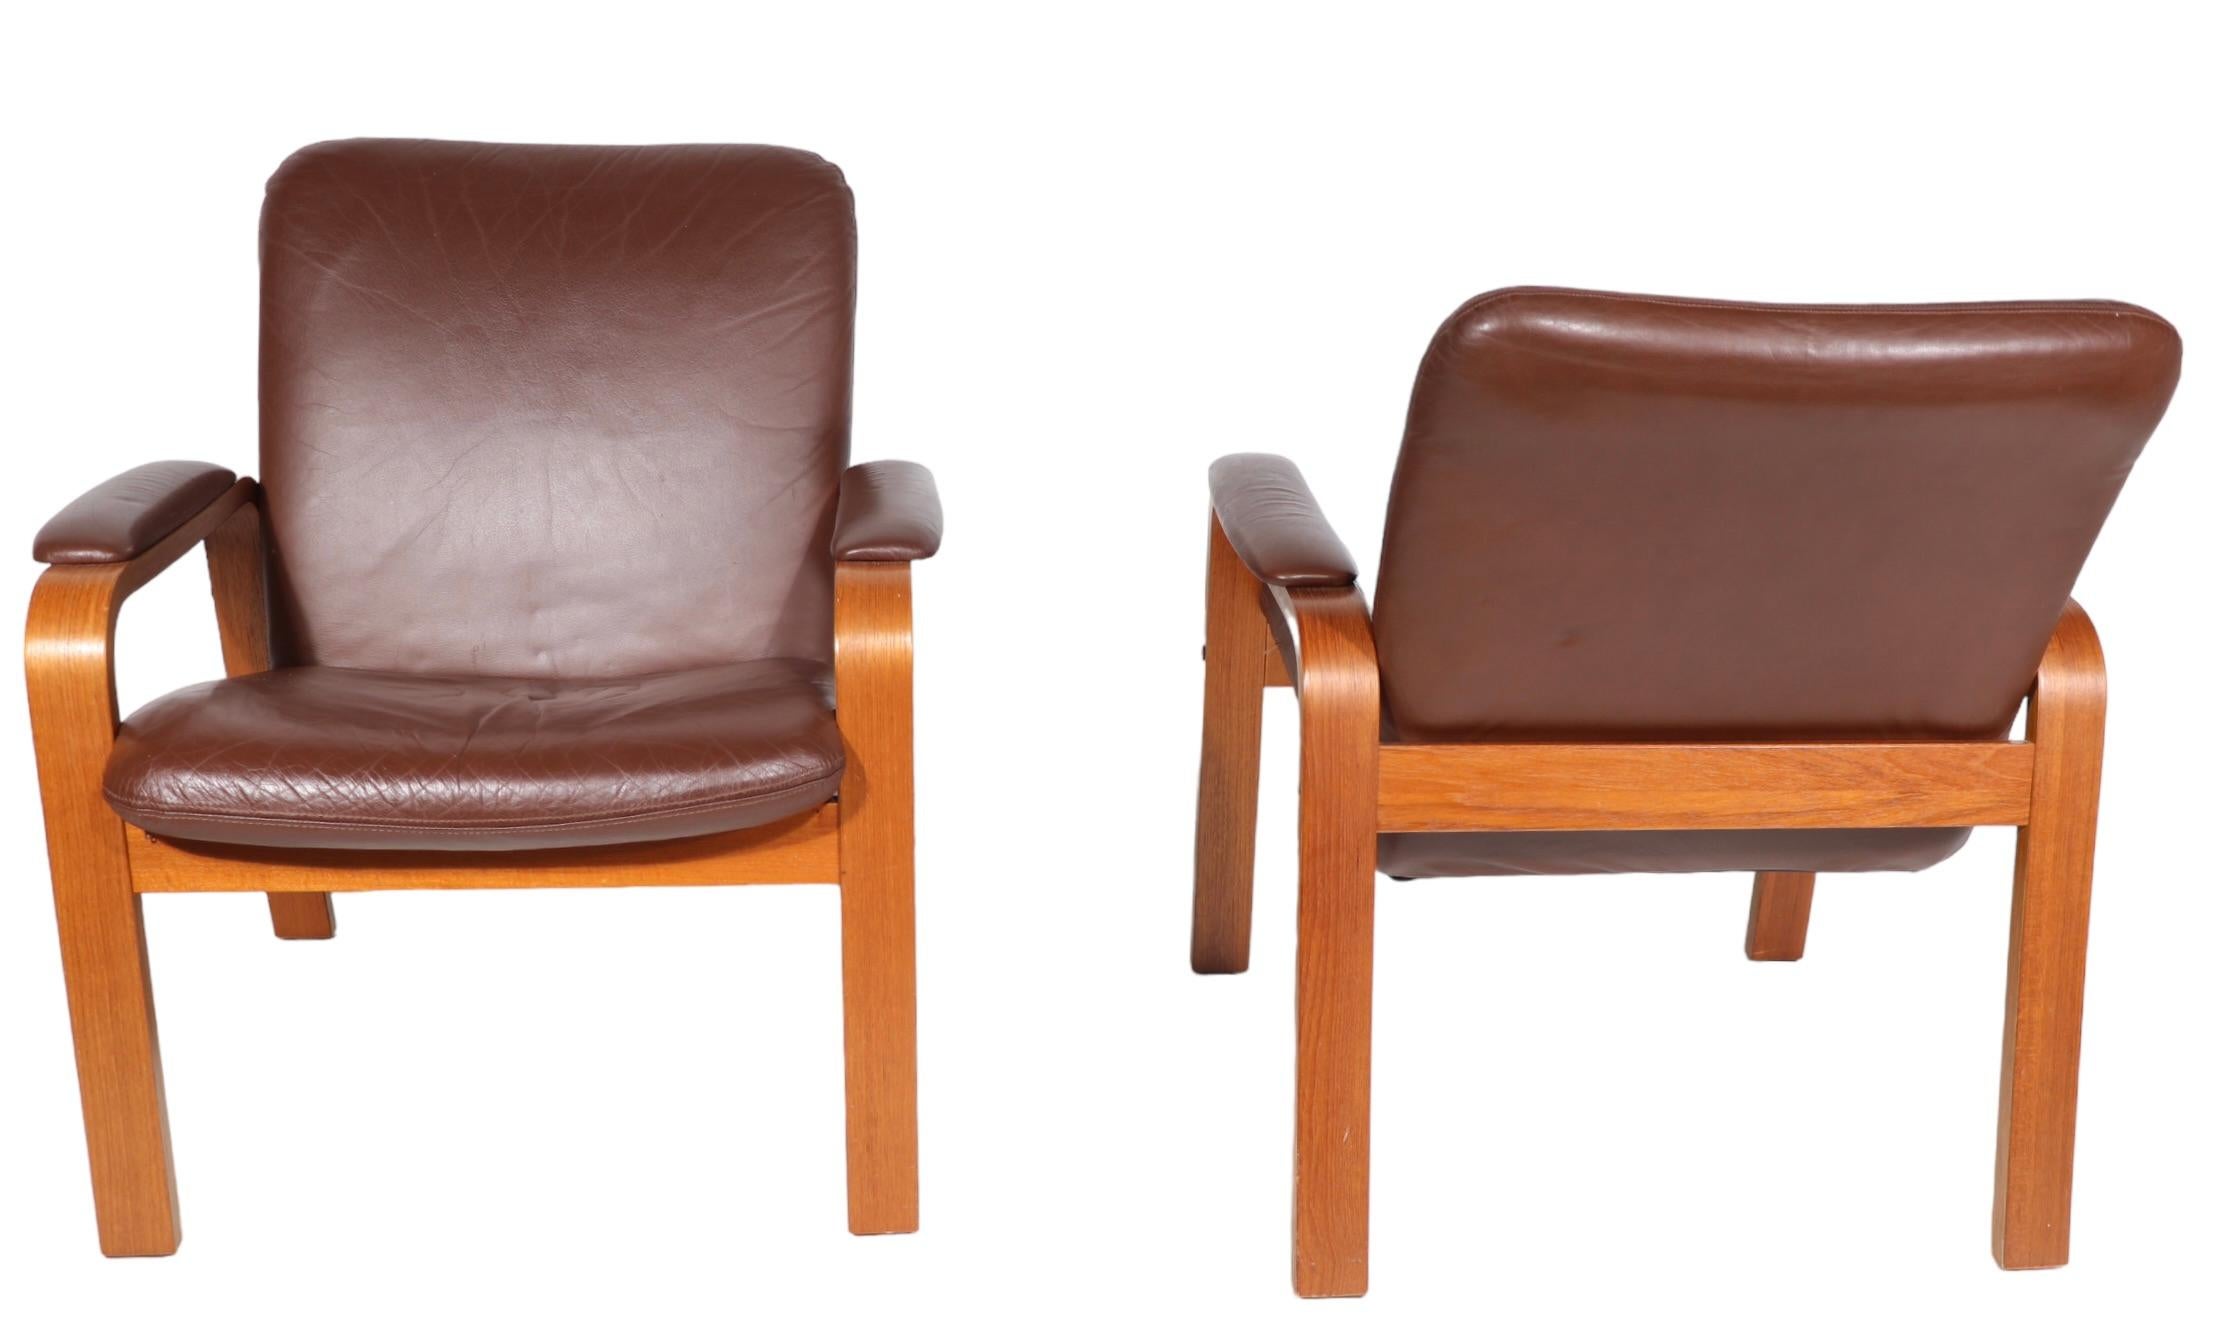 Pr. Scandinavian Mid Century Modern Lounge Arm Chairs Made in Norway by Ekorness For Sale 5